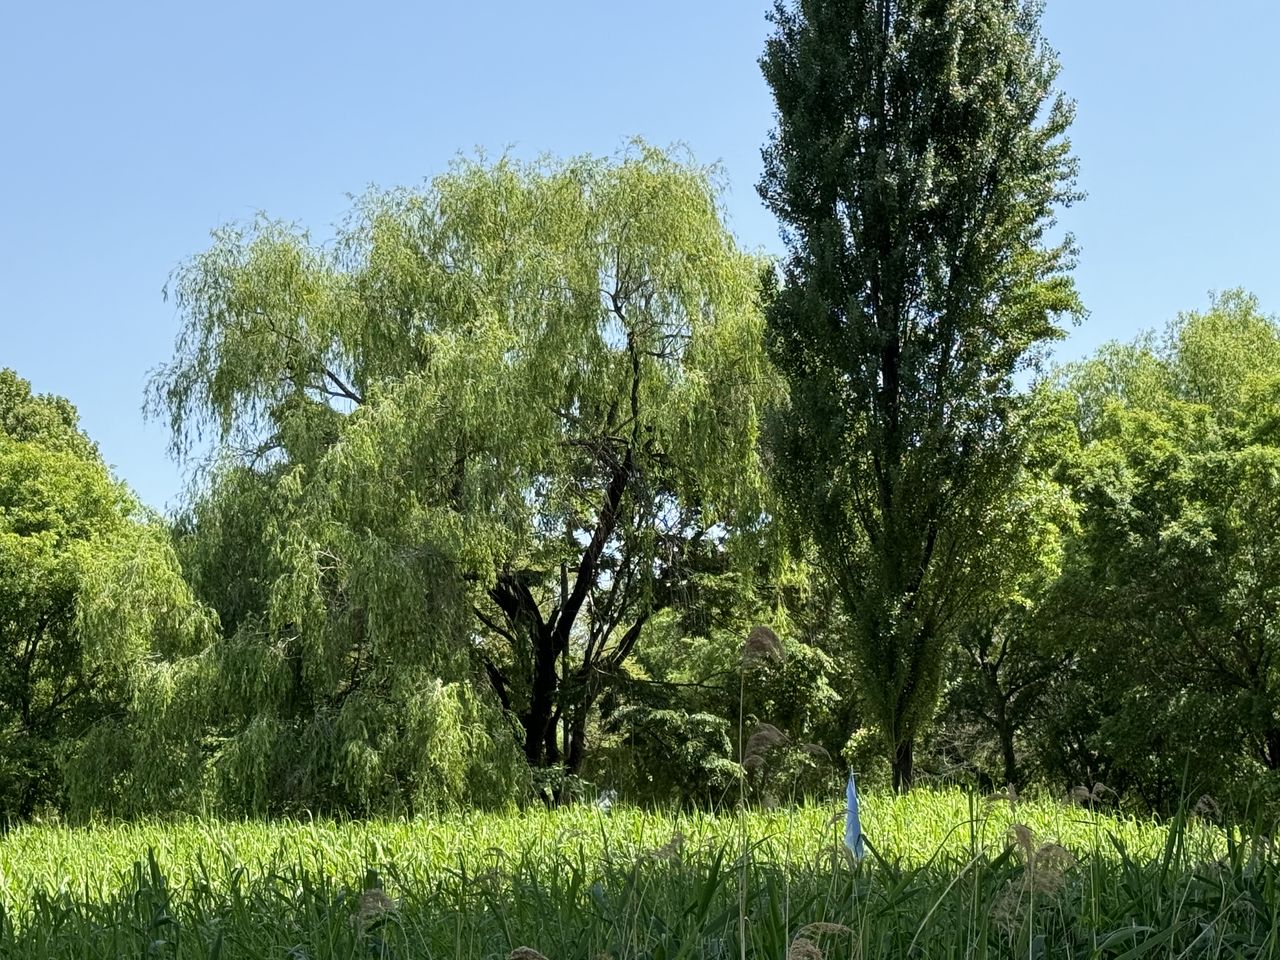 plant, tree, green, growth, nature, sky, beauty in nature, meadow, flower, grass, tranquility, no people, land, clear sky, day, woodland, environment, field, landscape, shrub, outdoors, leaf, sunlight, scenics - nature, tranquil scene, natural environment, sunny, pasture, foliage, lush foliage, non-urban scene, blue, vegetation